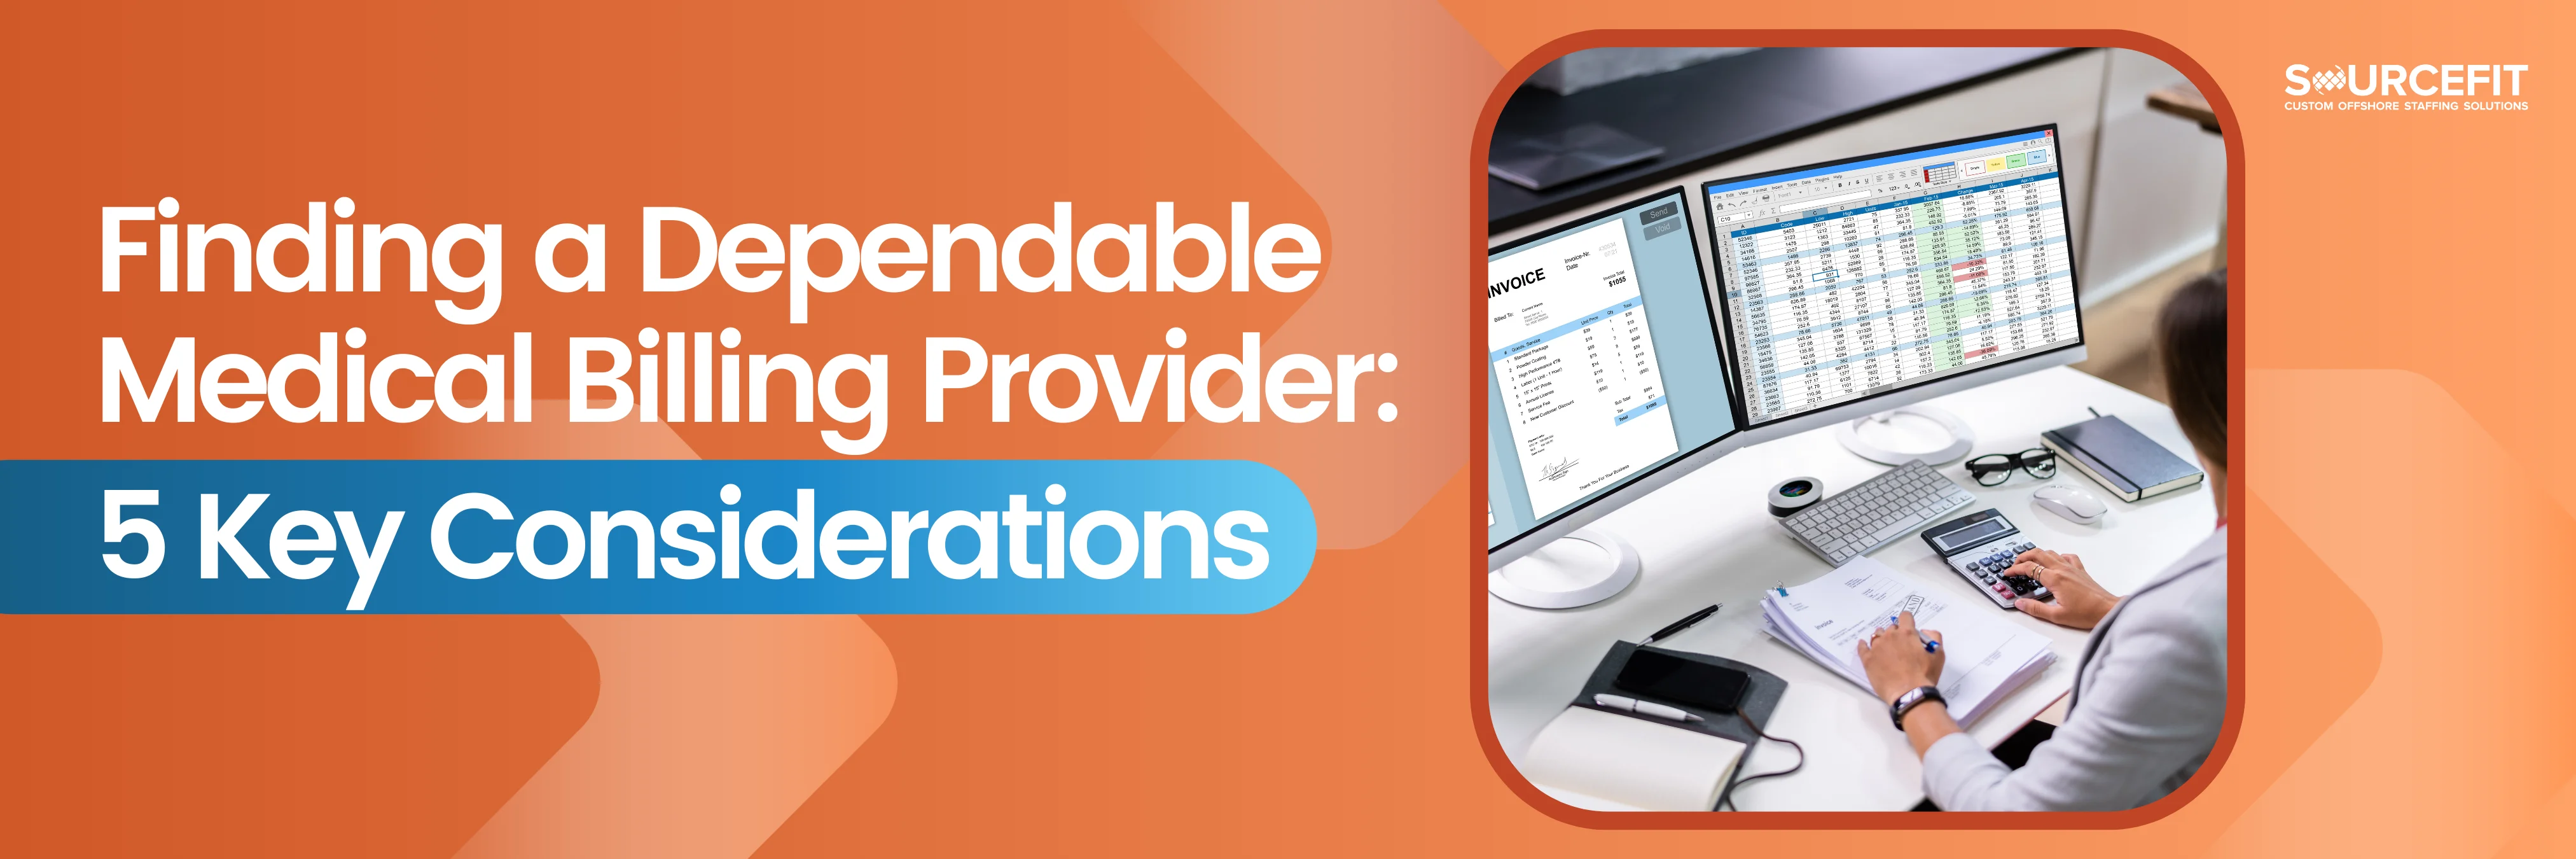 Finding-a-Dependable-Medical-Billing-Provider_-5-Key-Considerations-_1200x628-21